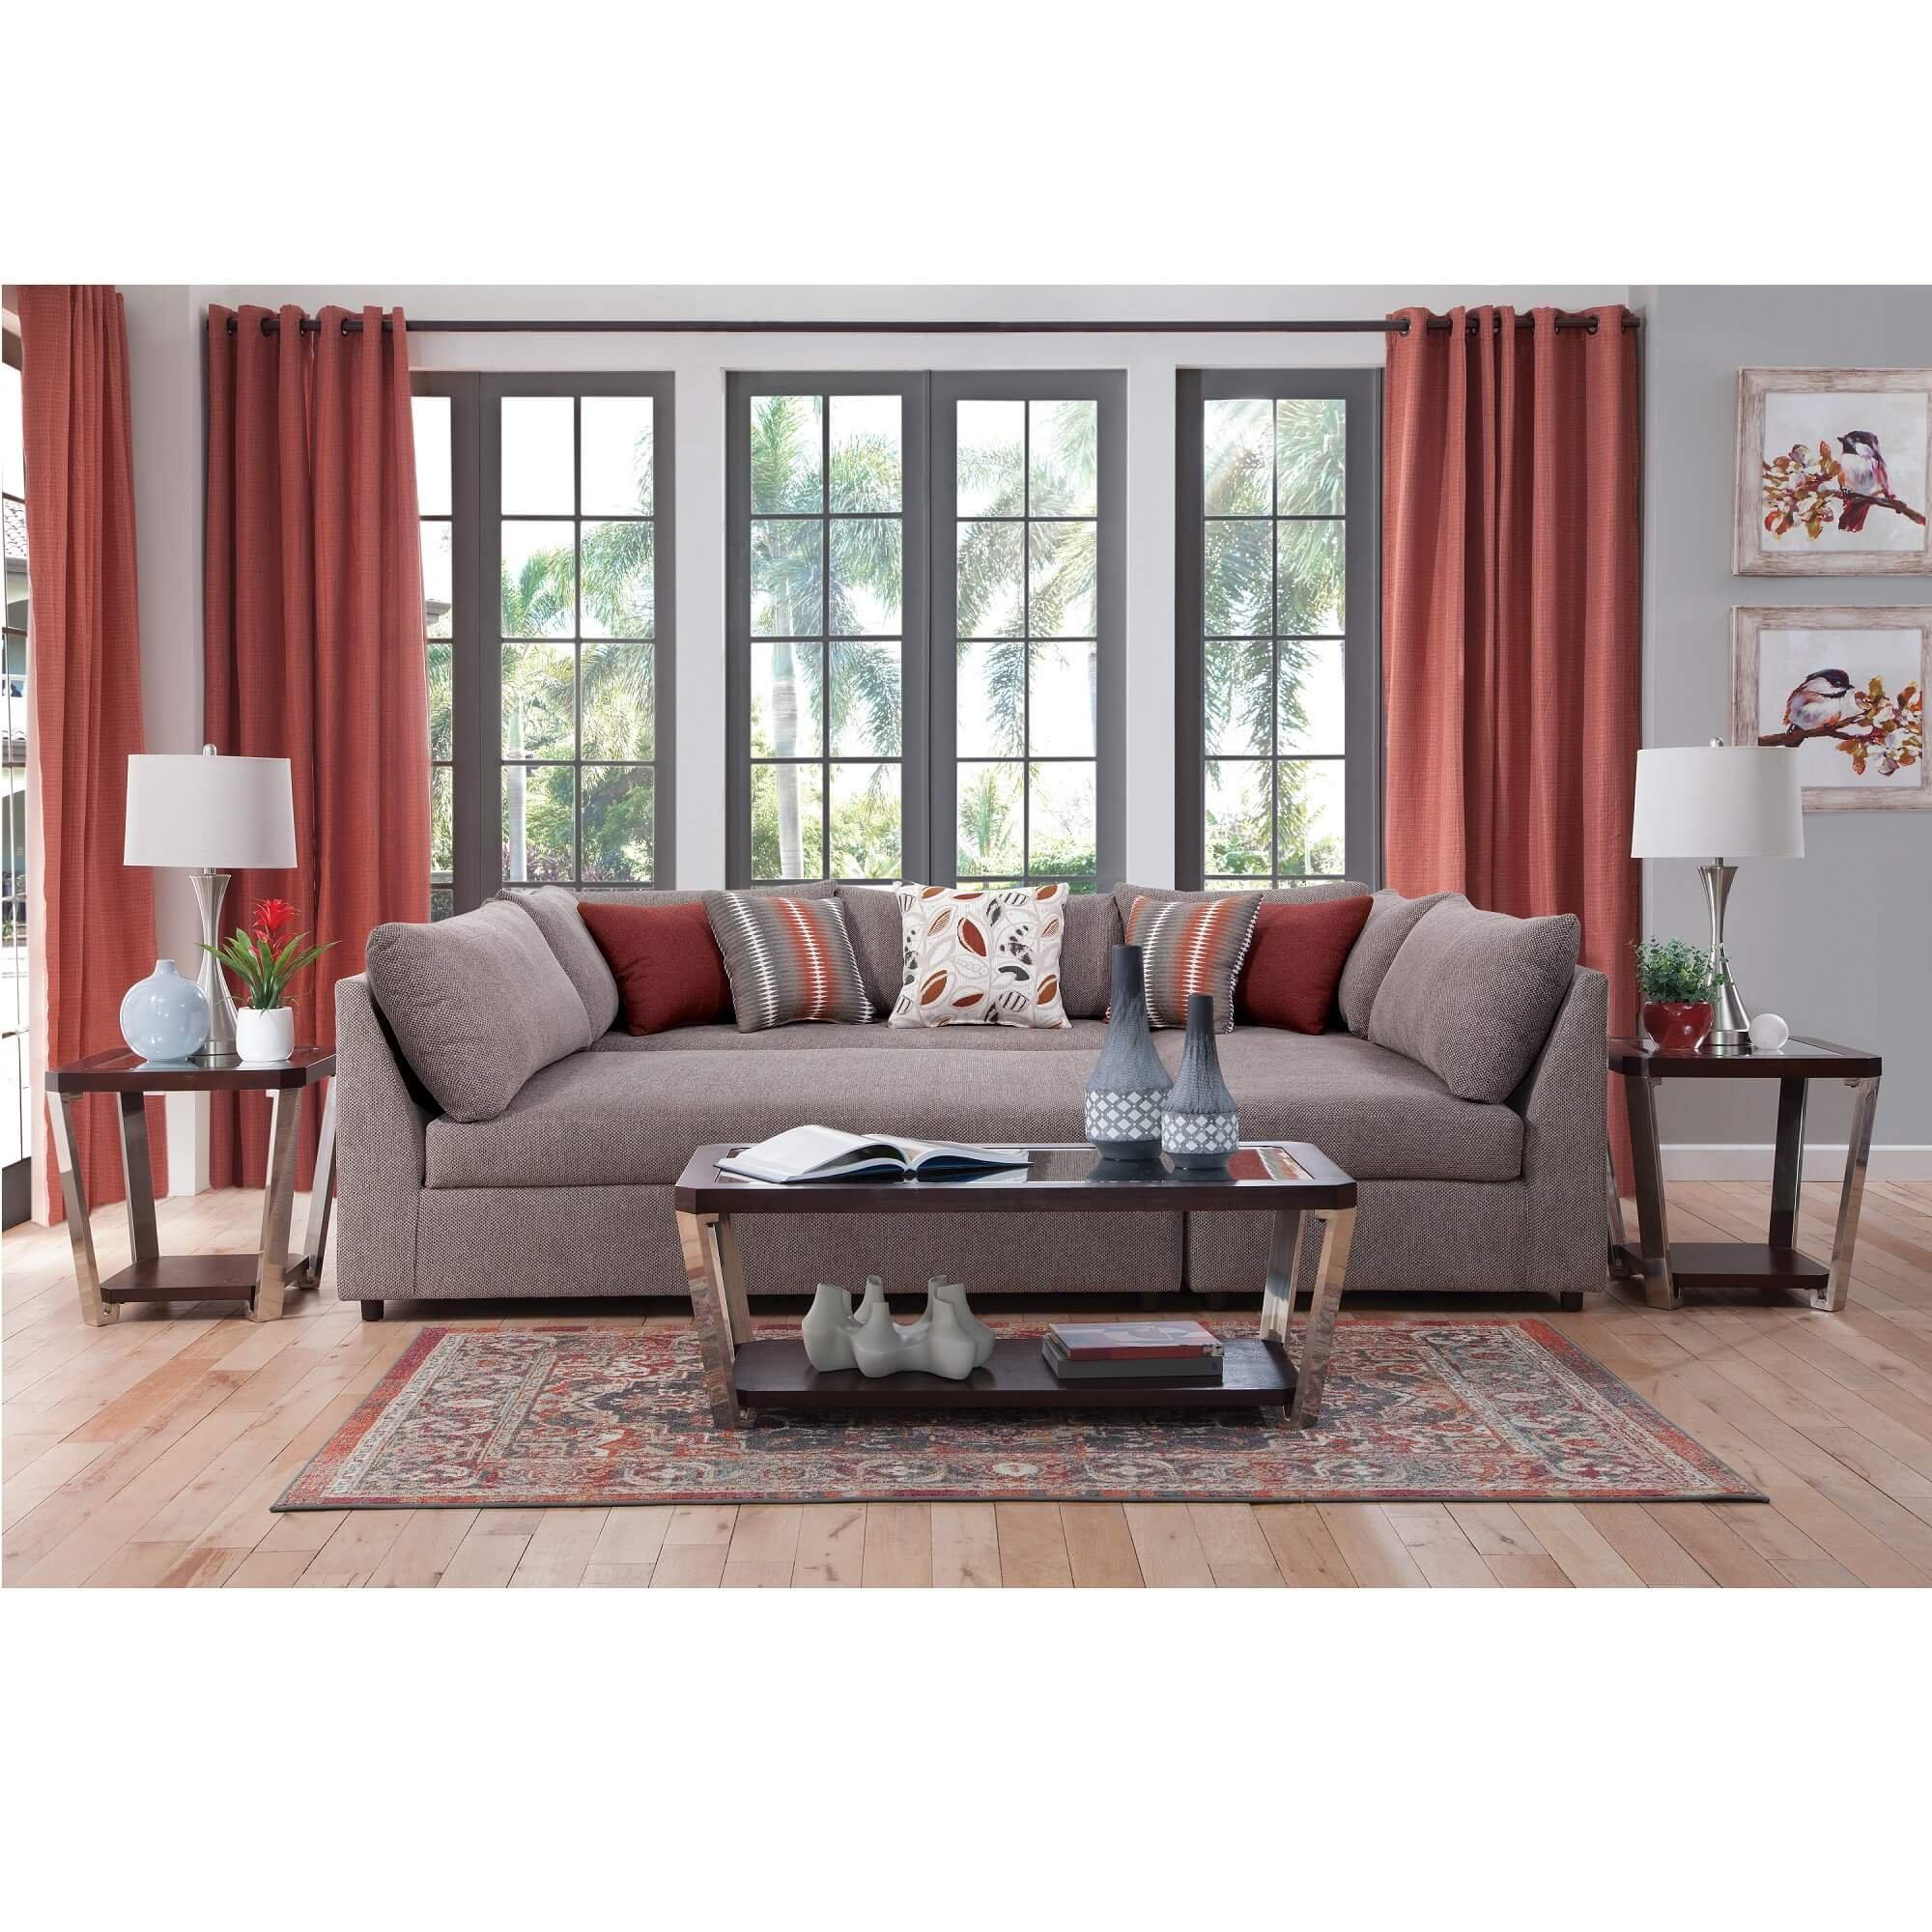 Rent To Own Woodhaven 8 Piece Puzzle Chaise Sectional Sofa Living Room Collection At Aarons Today